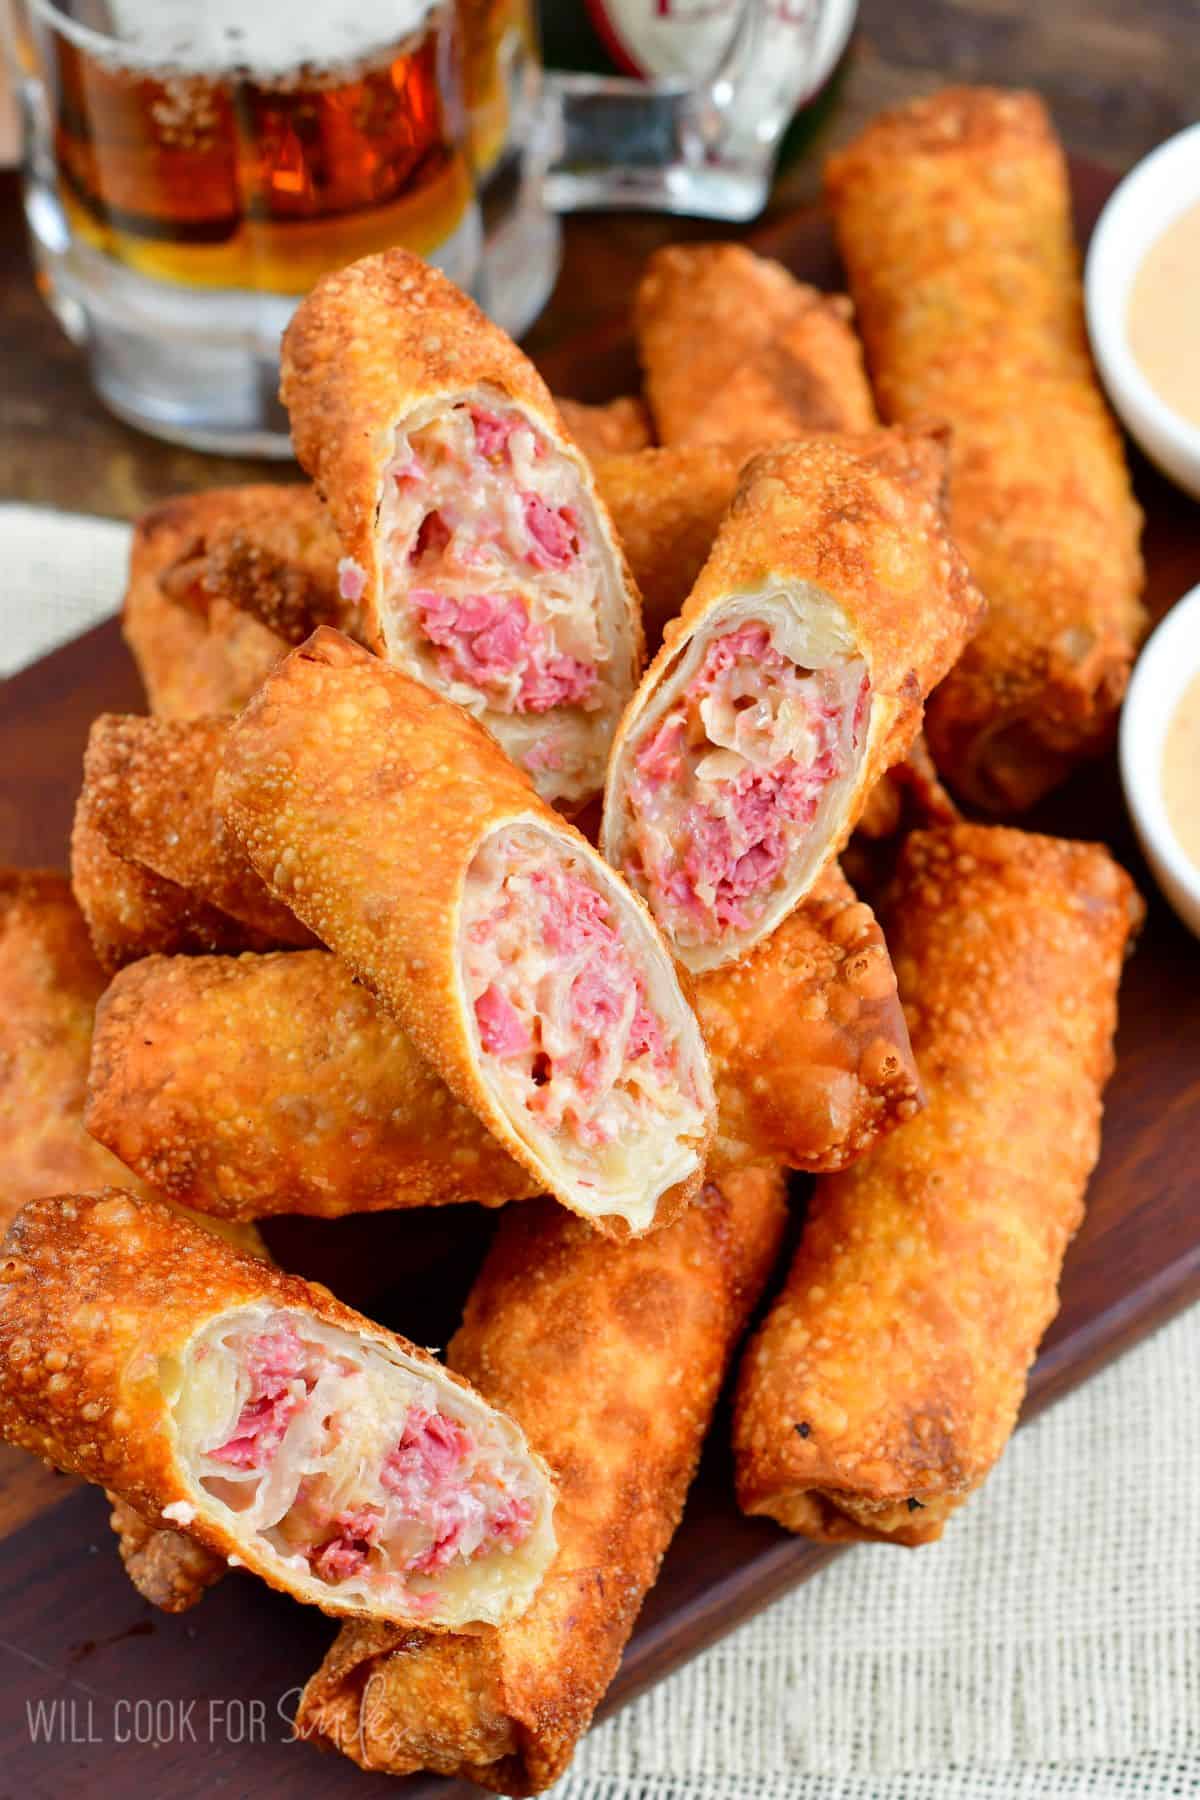 Reuben egg rolls with several cut in half and places on a wood tray.